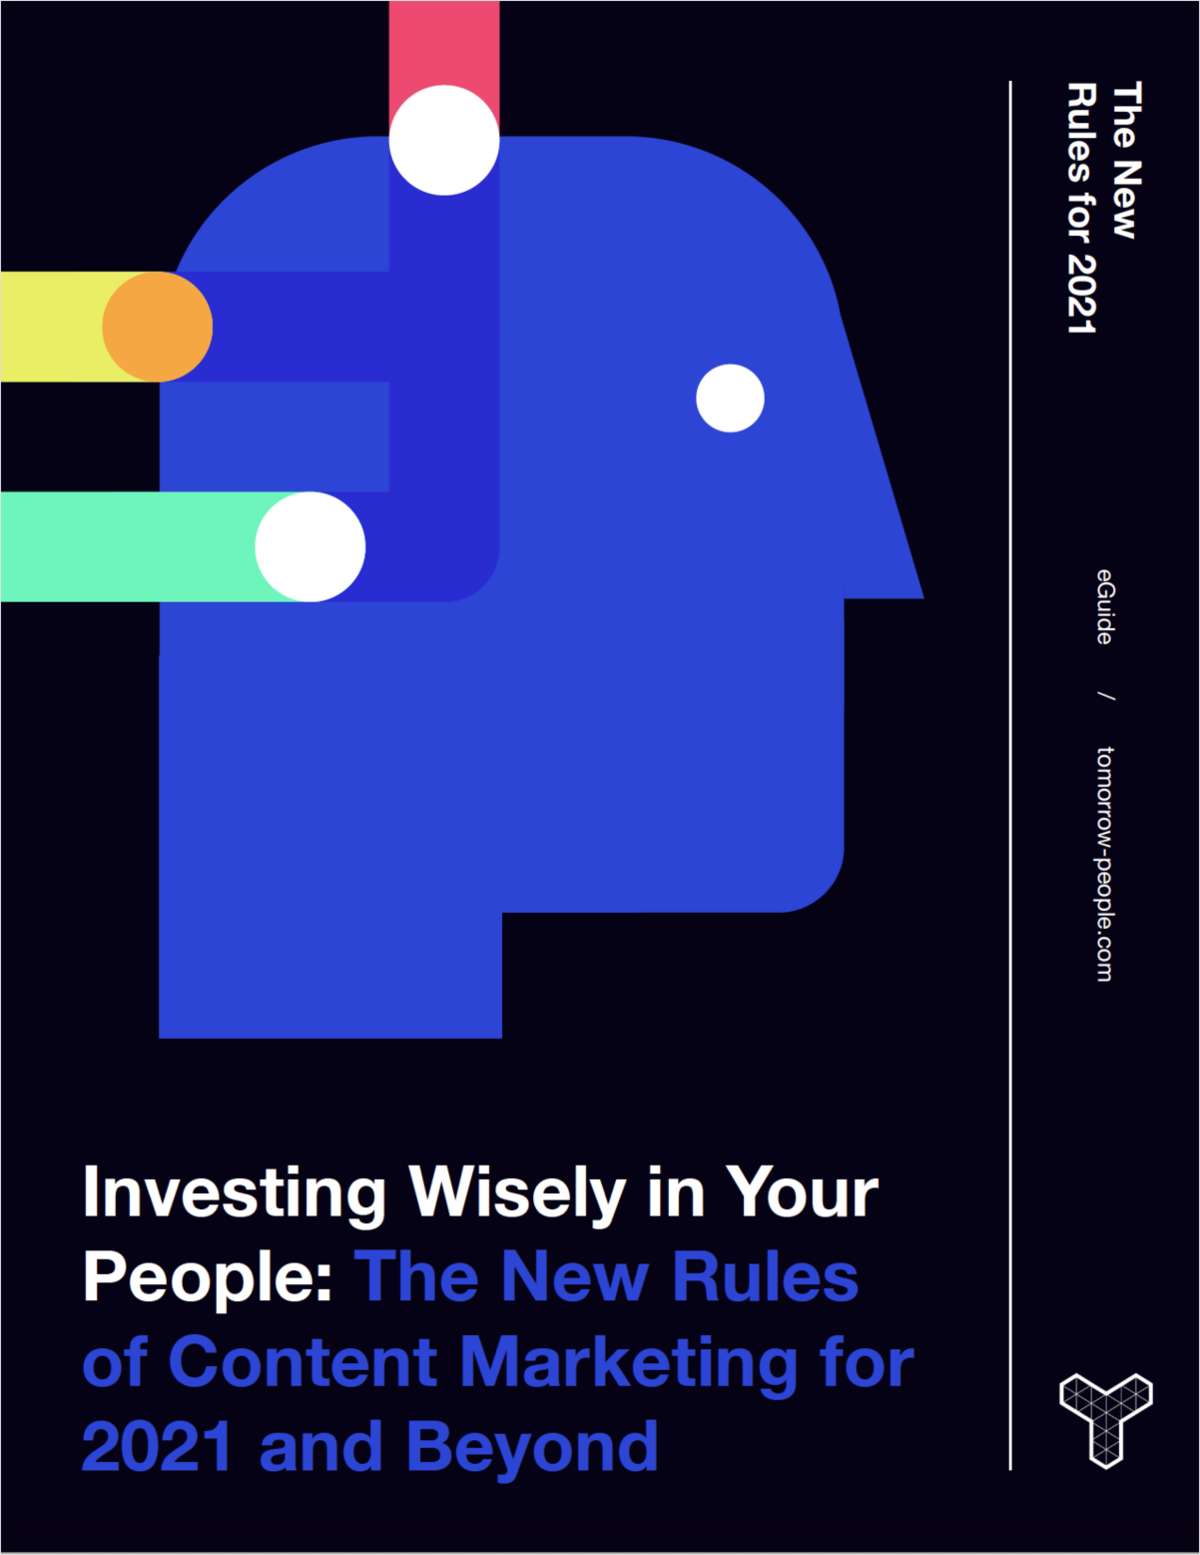 Investing Wisely in Your People - The New Rules of Content Marketing for 2021 and Beyond